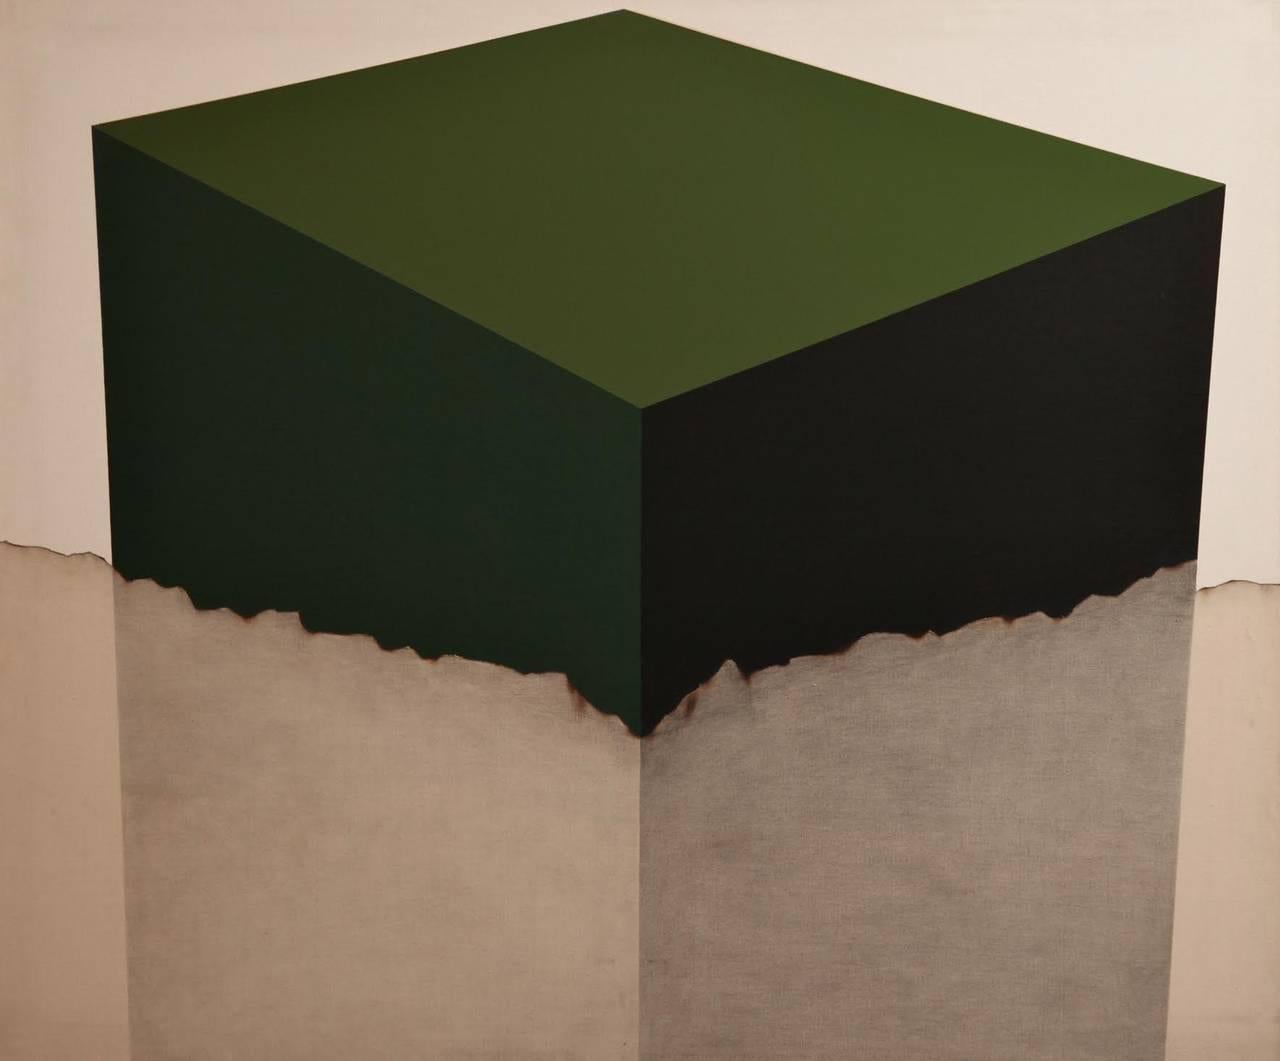 Cube - Painting by David R. Prentice